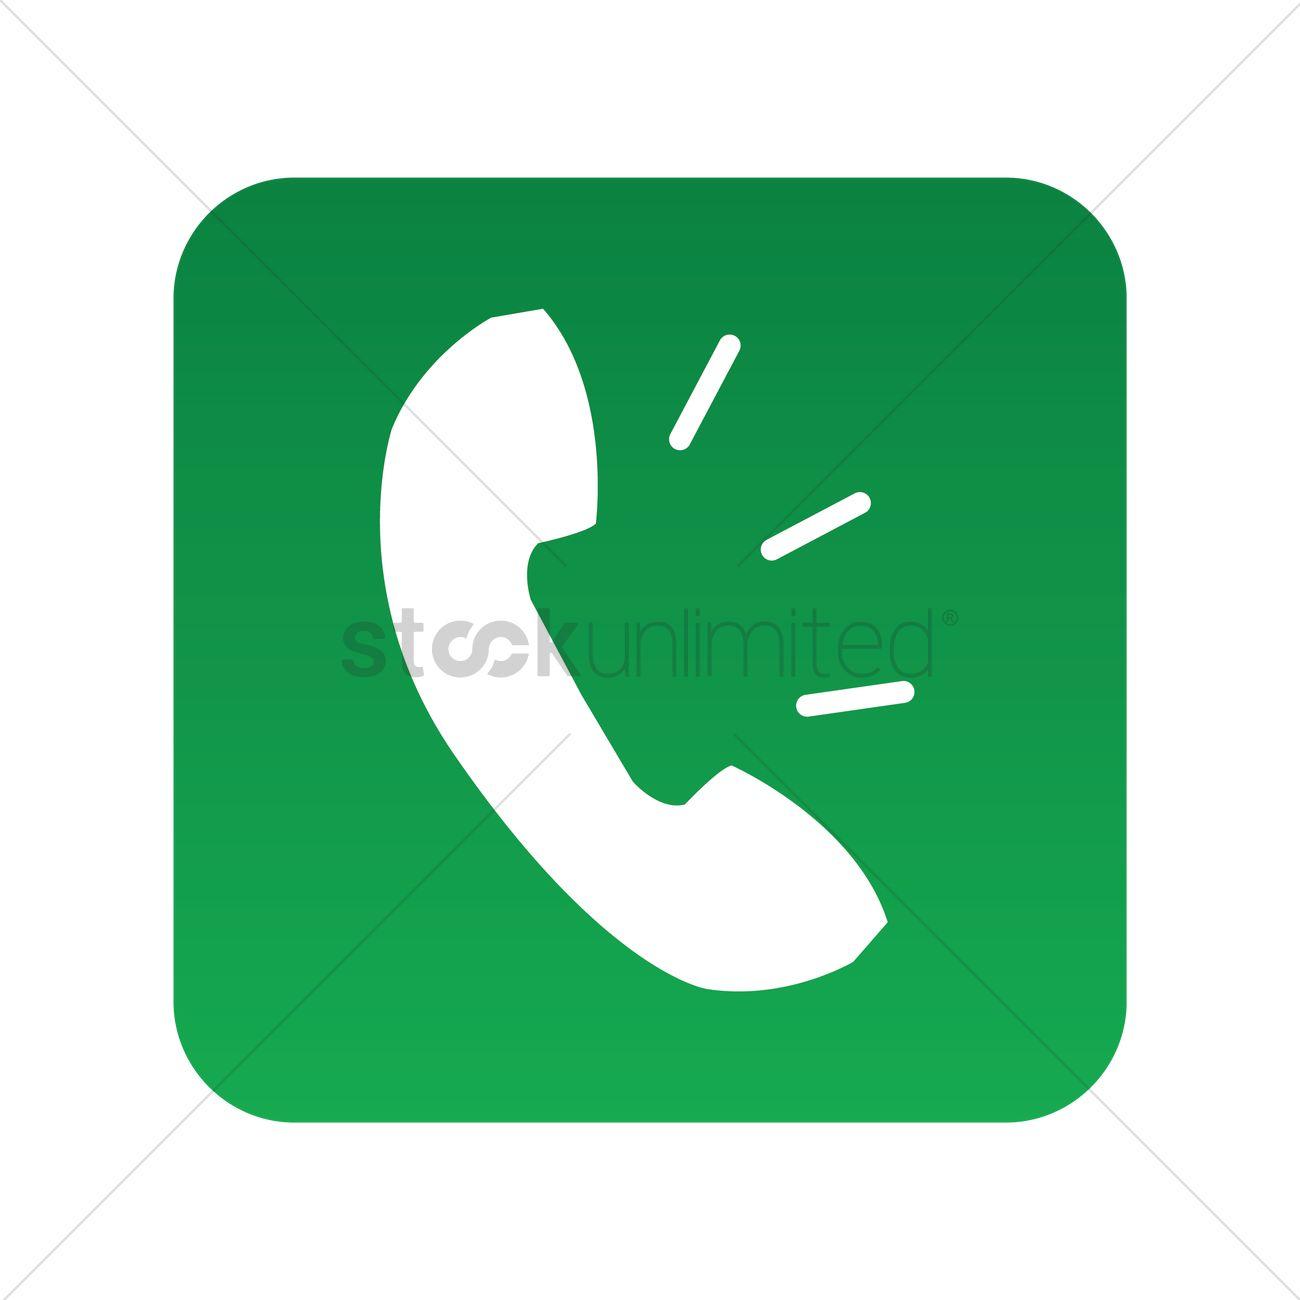 Phone Call Logo - Phone call icon Vector Image - 1941796 | StockUnlimited